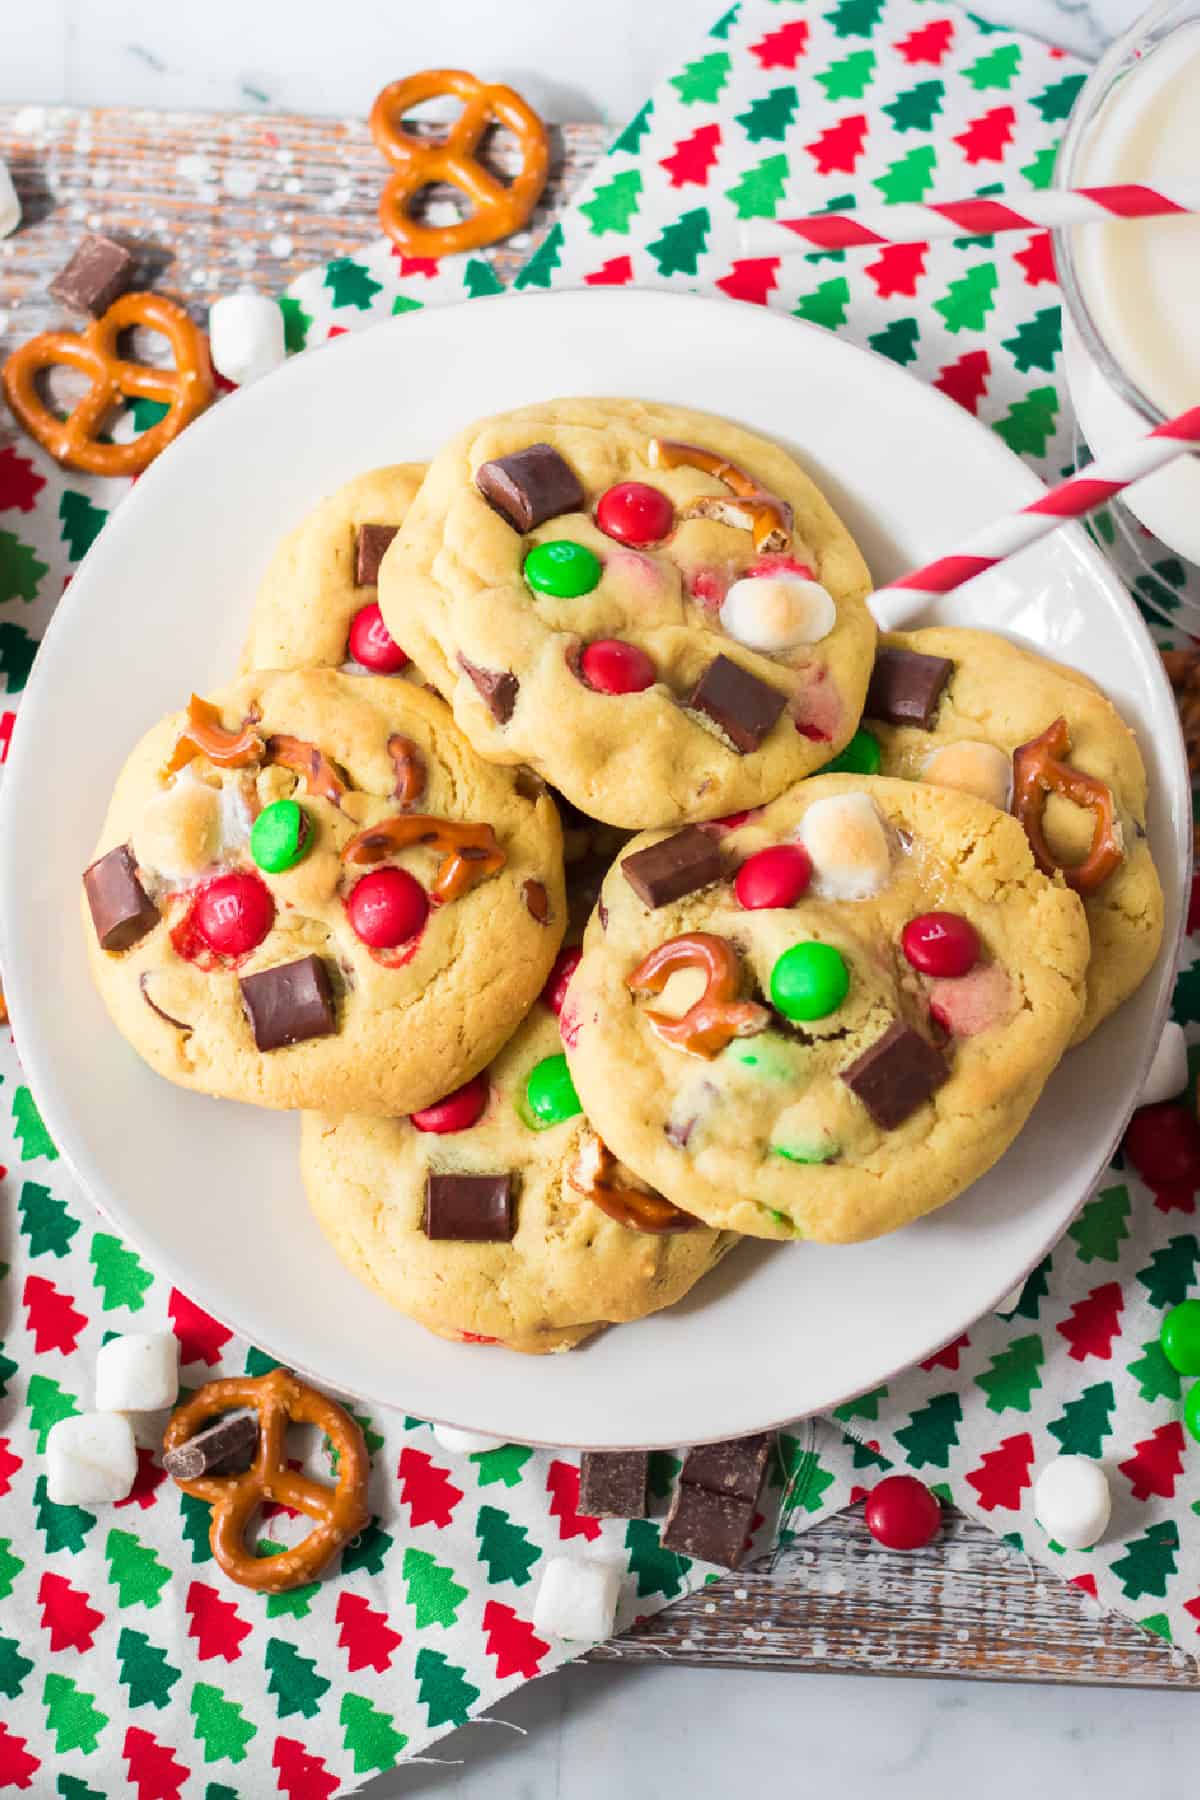 Plate of cookies covered in red and green M&Ms, chocolate chunks, marshmallows and pretzel pieces on a counter from above with a glass of milk nearby.